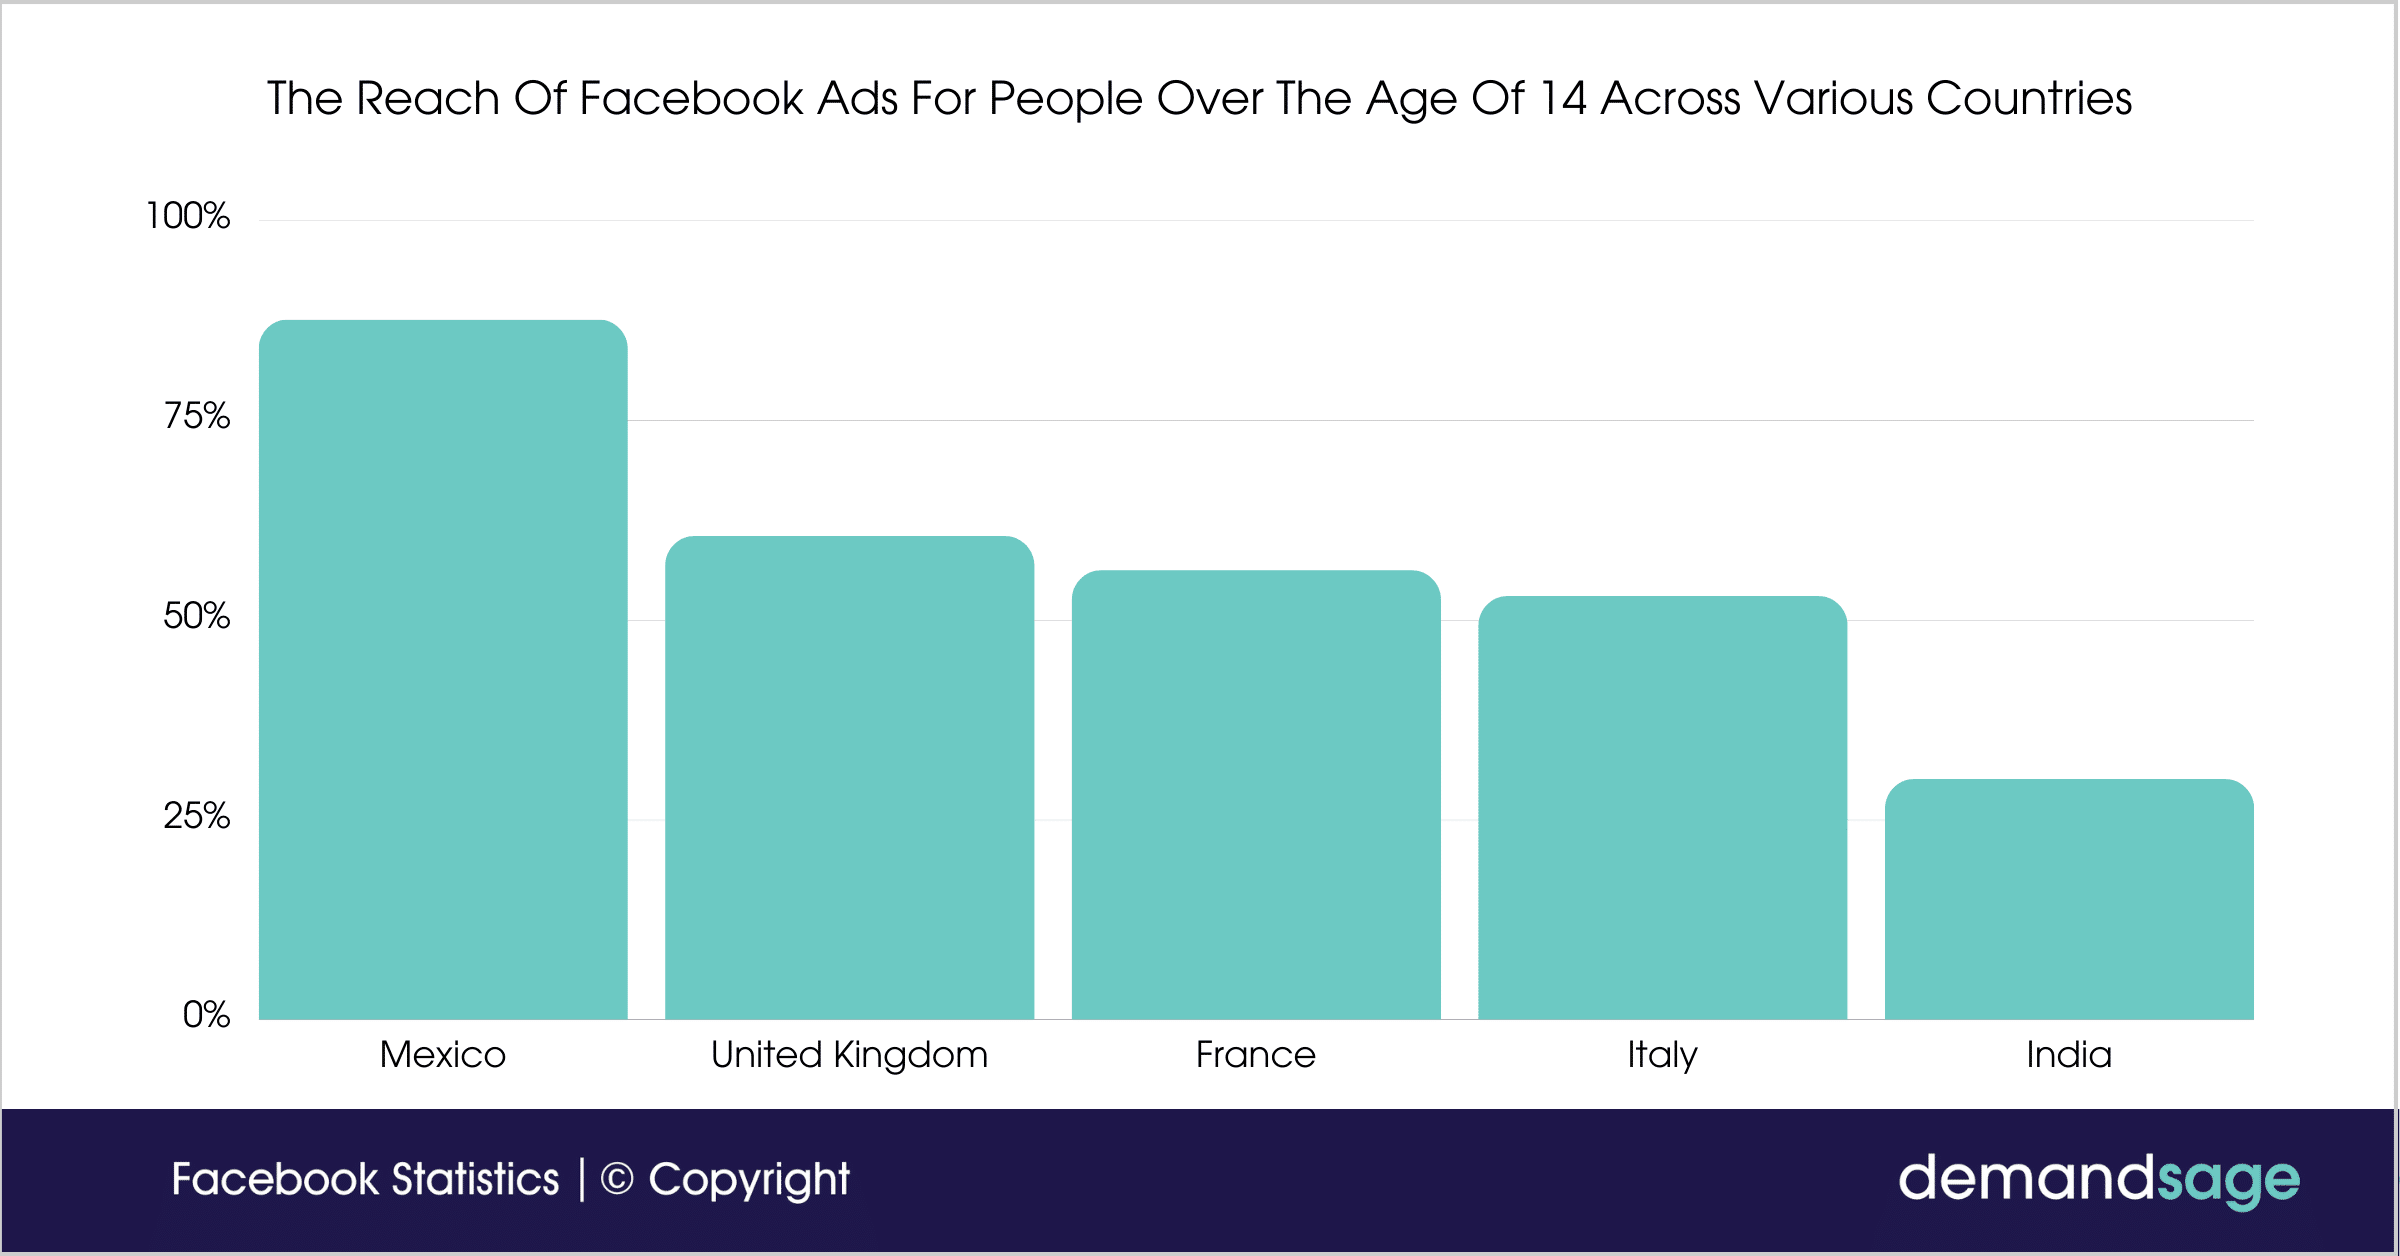 The Reach Of Facebook Ads For People Over The Age Of 14 Across Various Countries